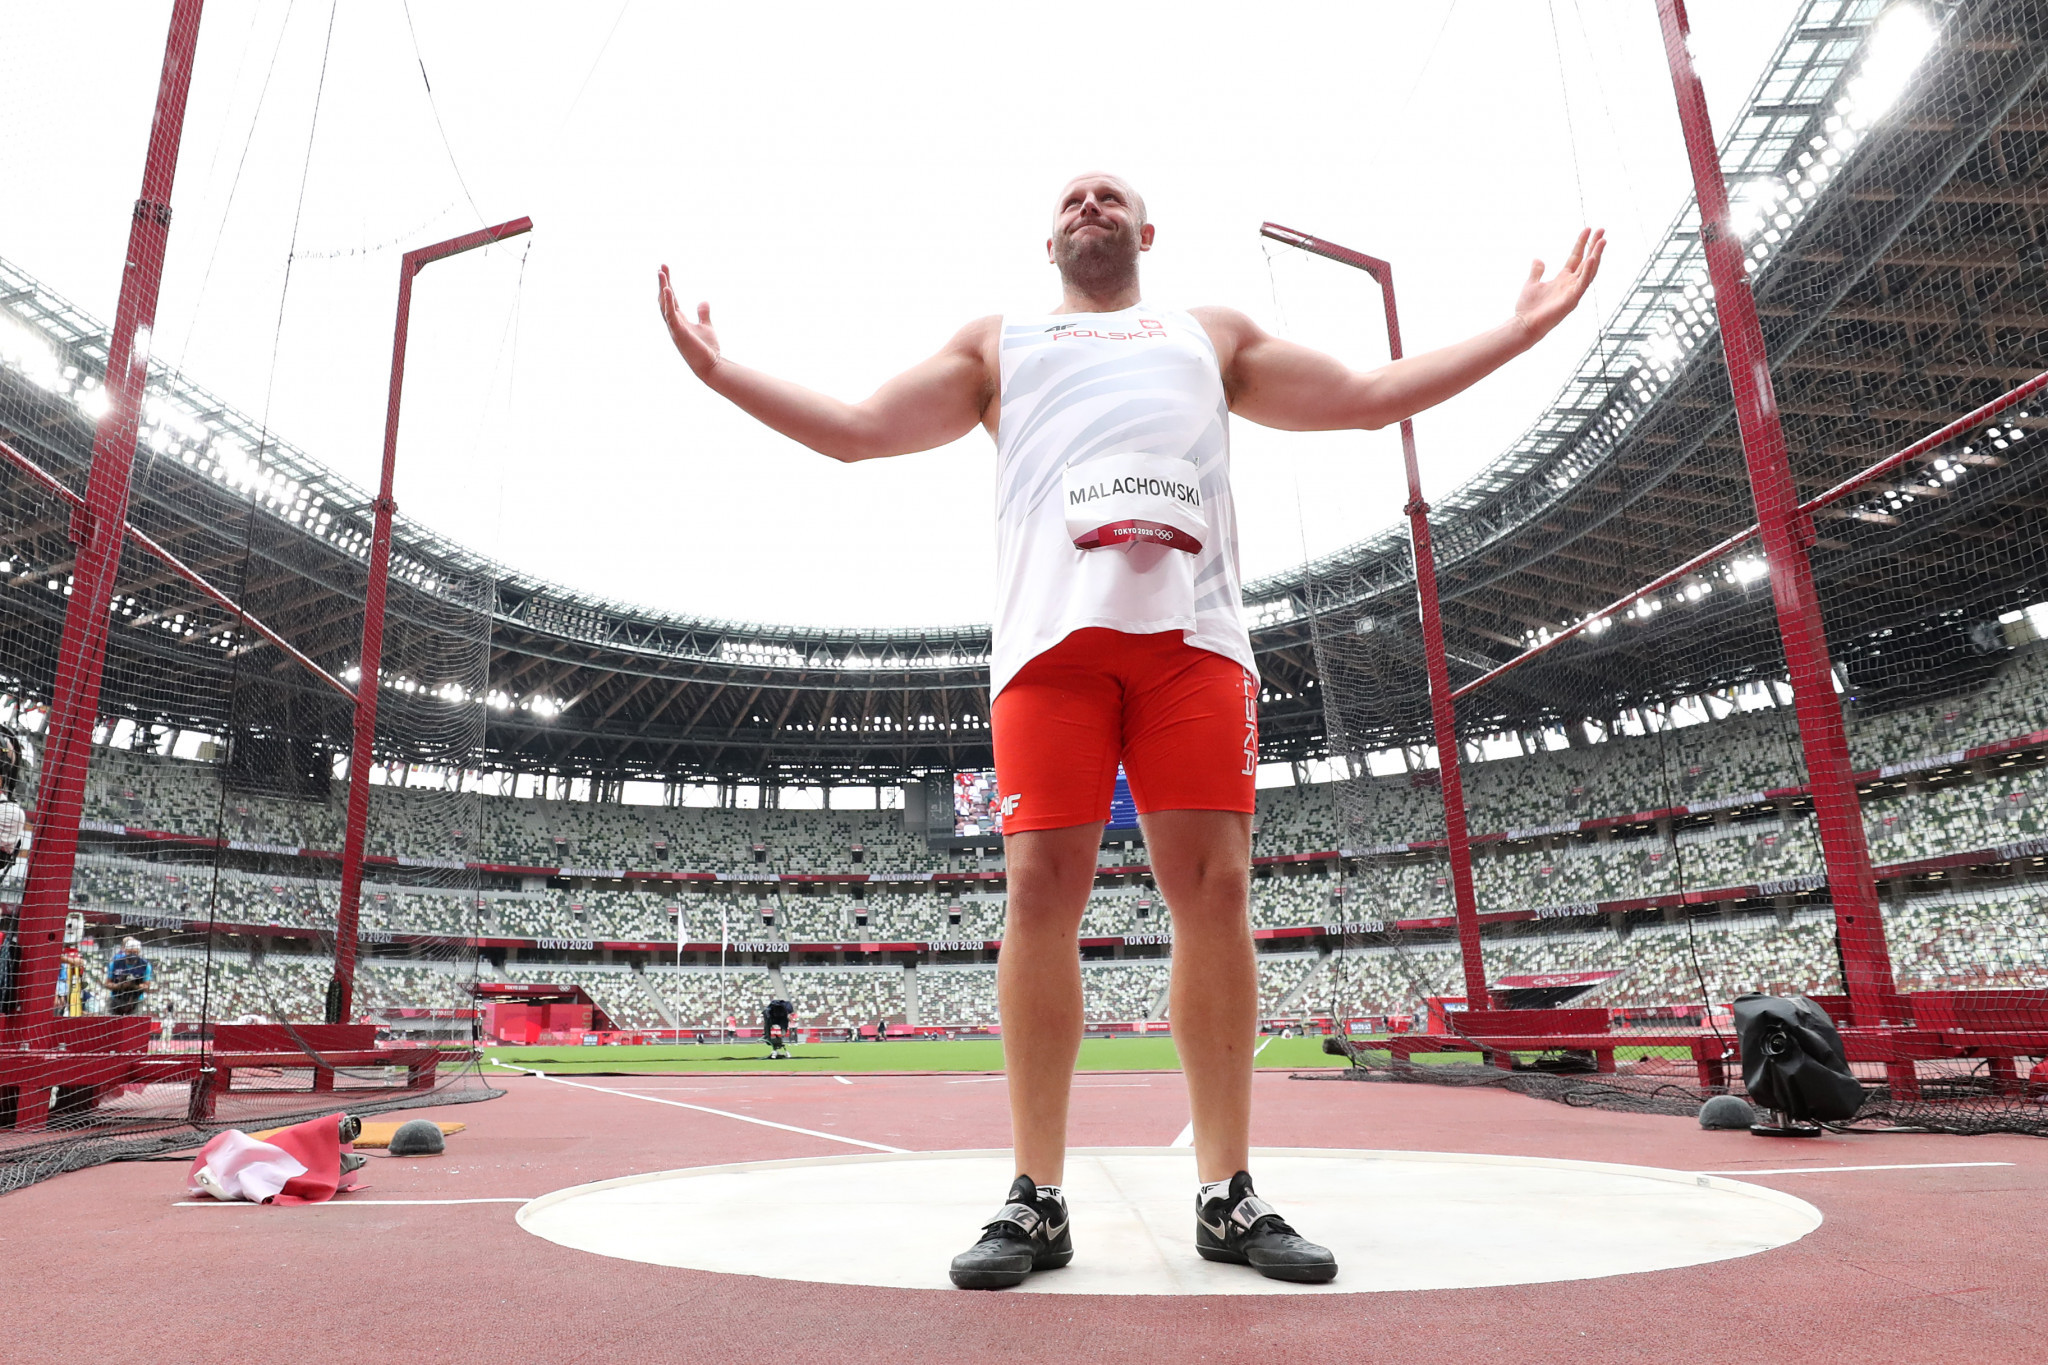 Discus thrower Piotr Malachowski will retire after competing in his home country one final time ©Getty Images